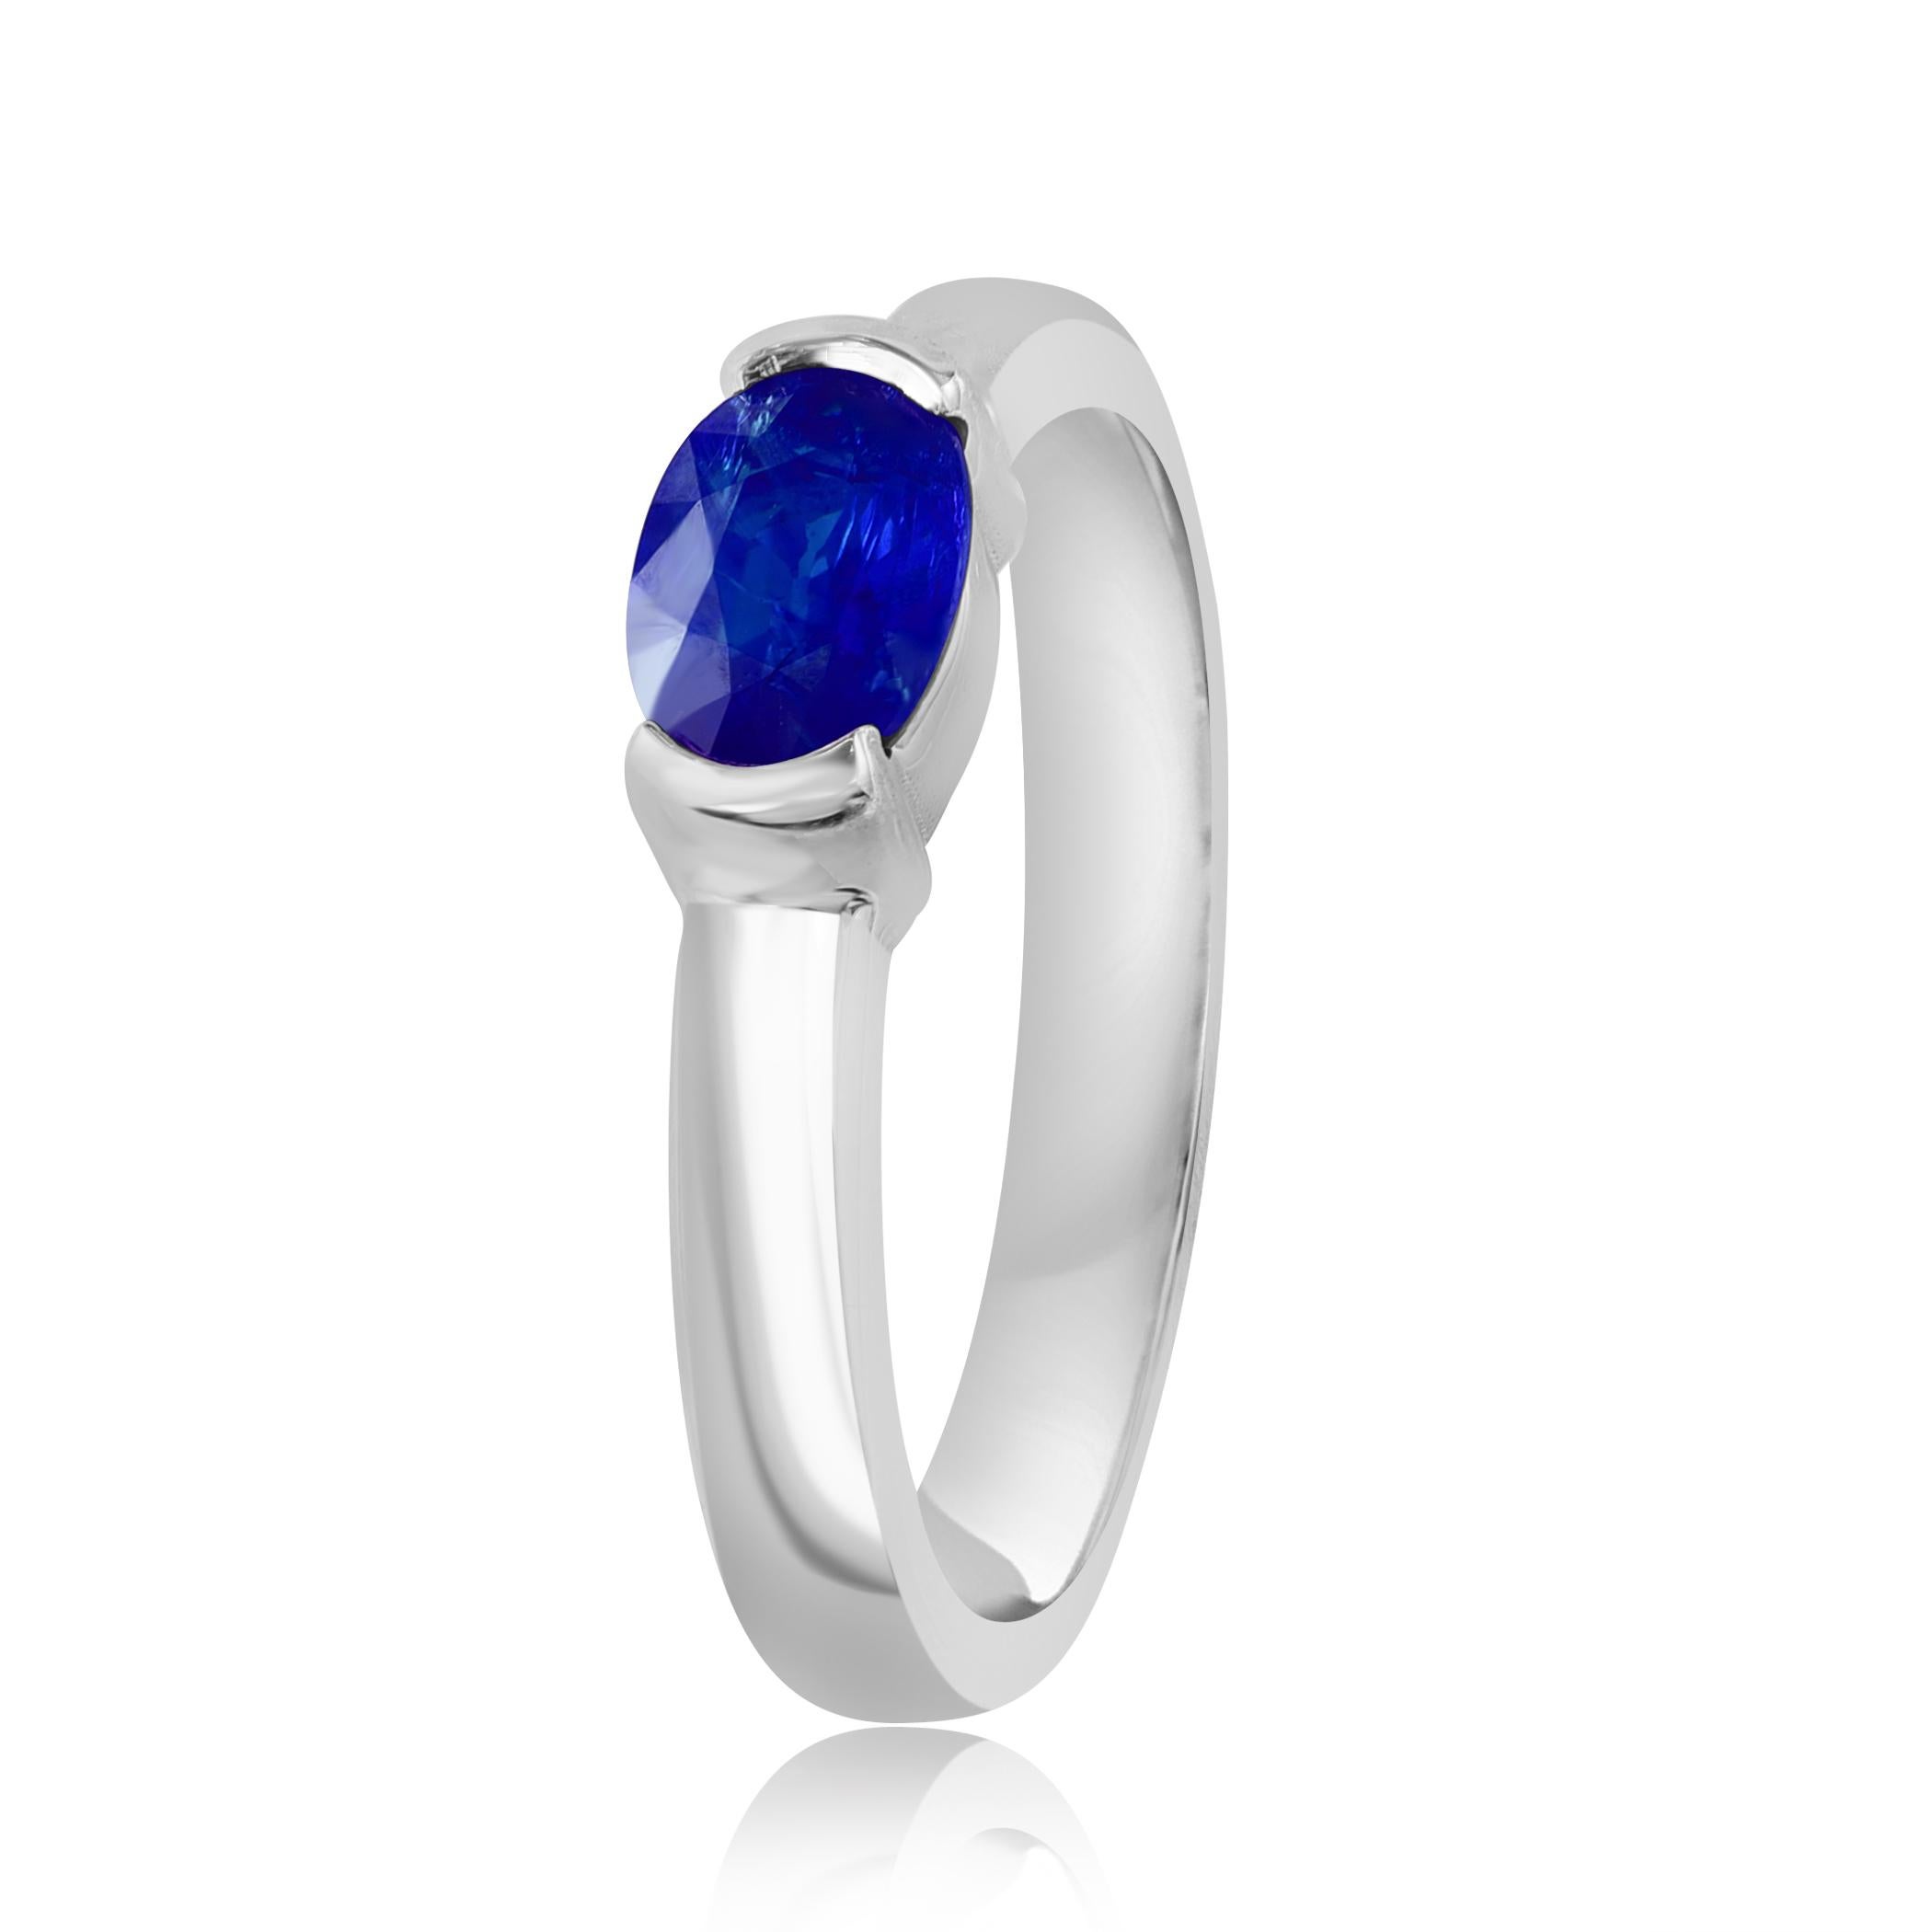 An elegant wedding band ring featuring an astonishing 1.00 Carat Oval Cut Blue Sapphire, set in a beautiful wide 14K white gold band. 

Style is available in different price ranges. Prices are based on your selection. Don't hesitate to get in touch